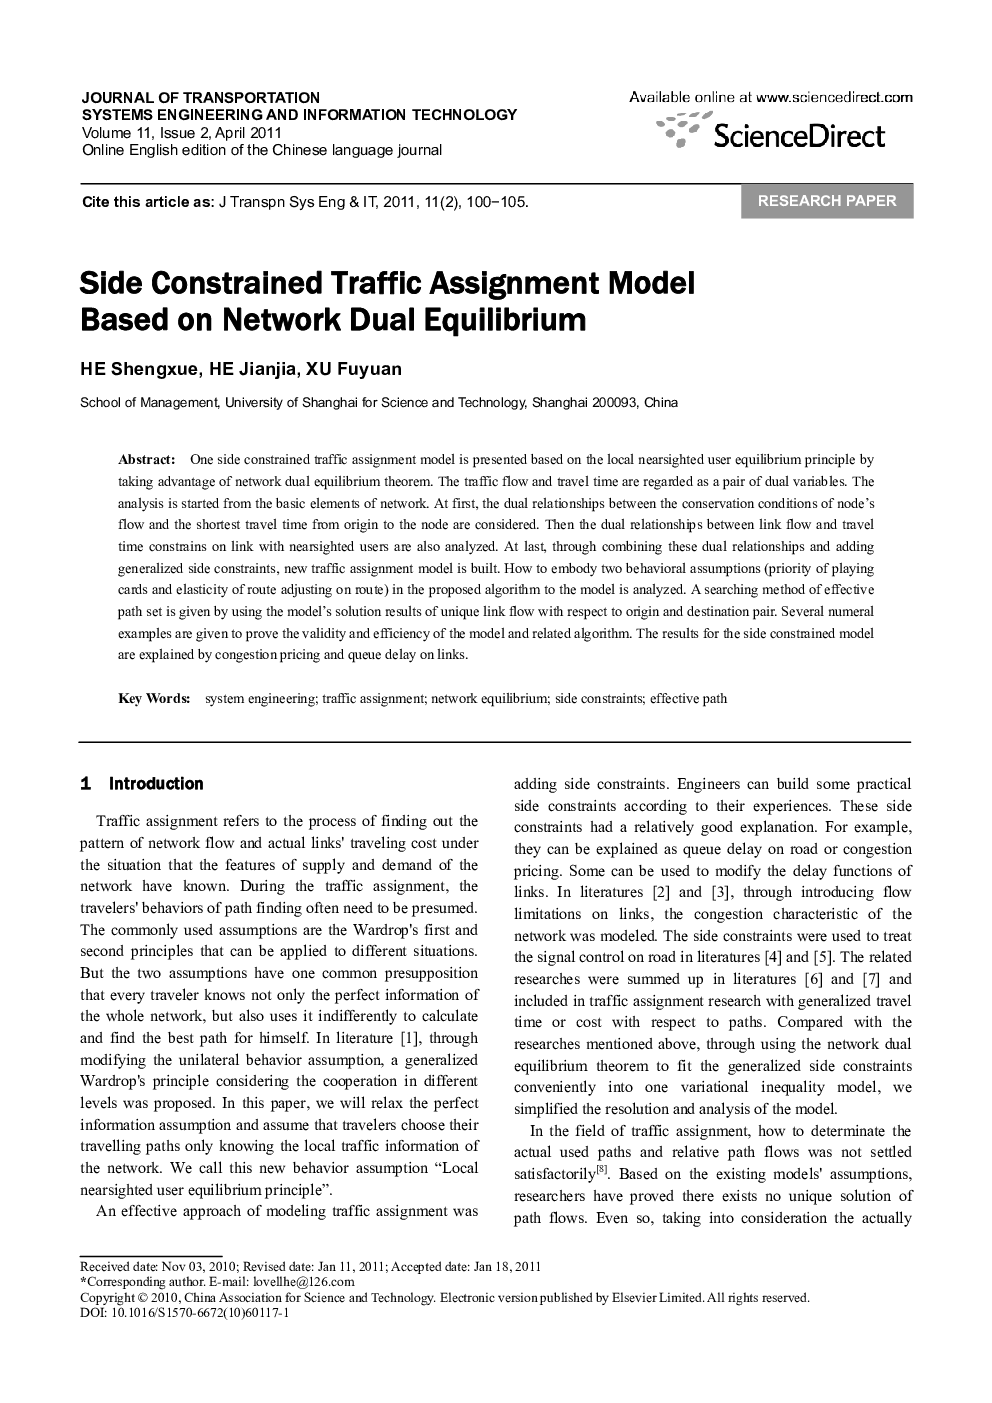 Side Constrained Traffic Assignment Model Based on Network Dual Equilibrium